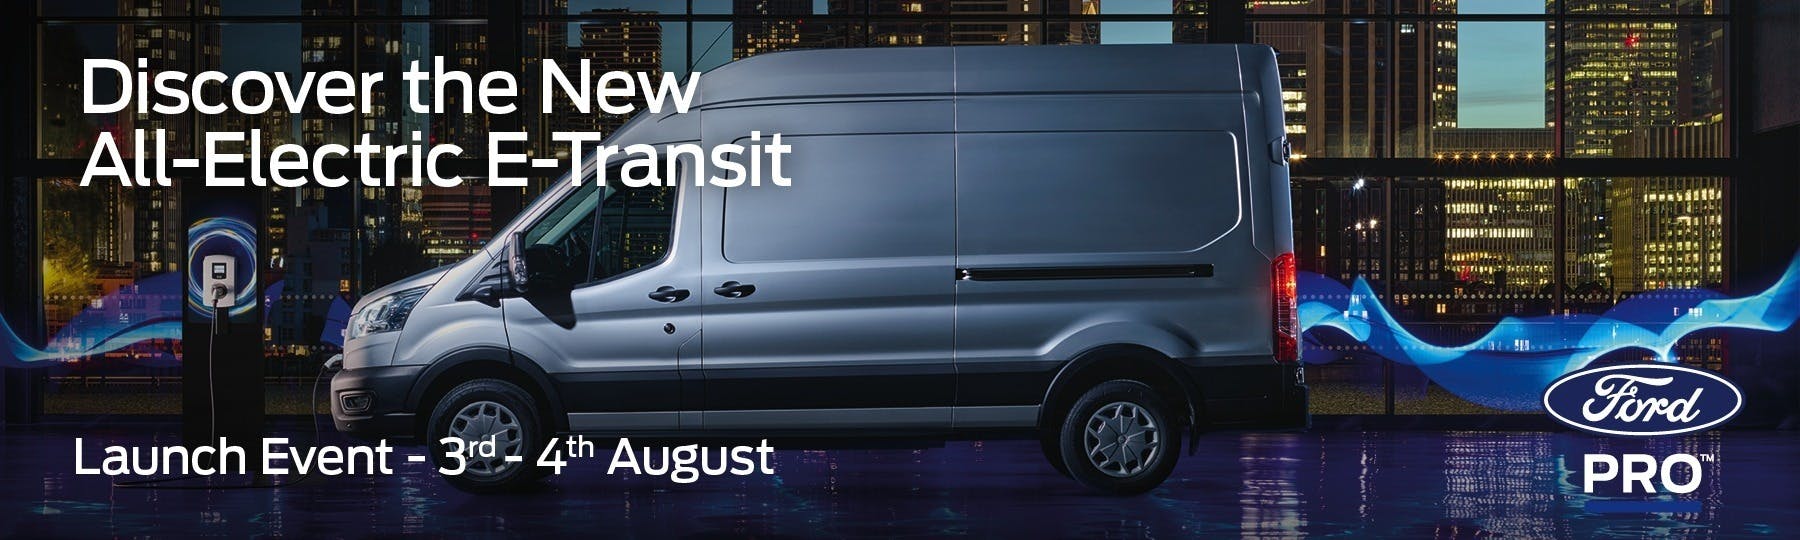 All-Electric Ford E-Transit Event Offer